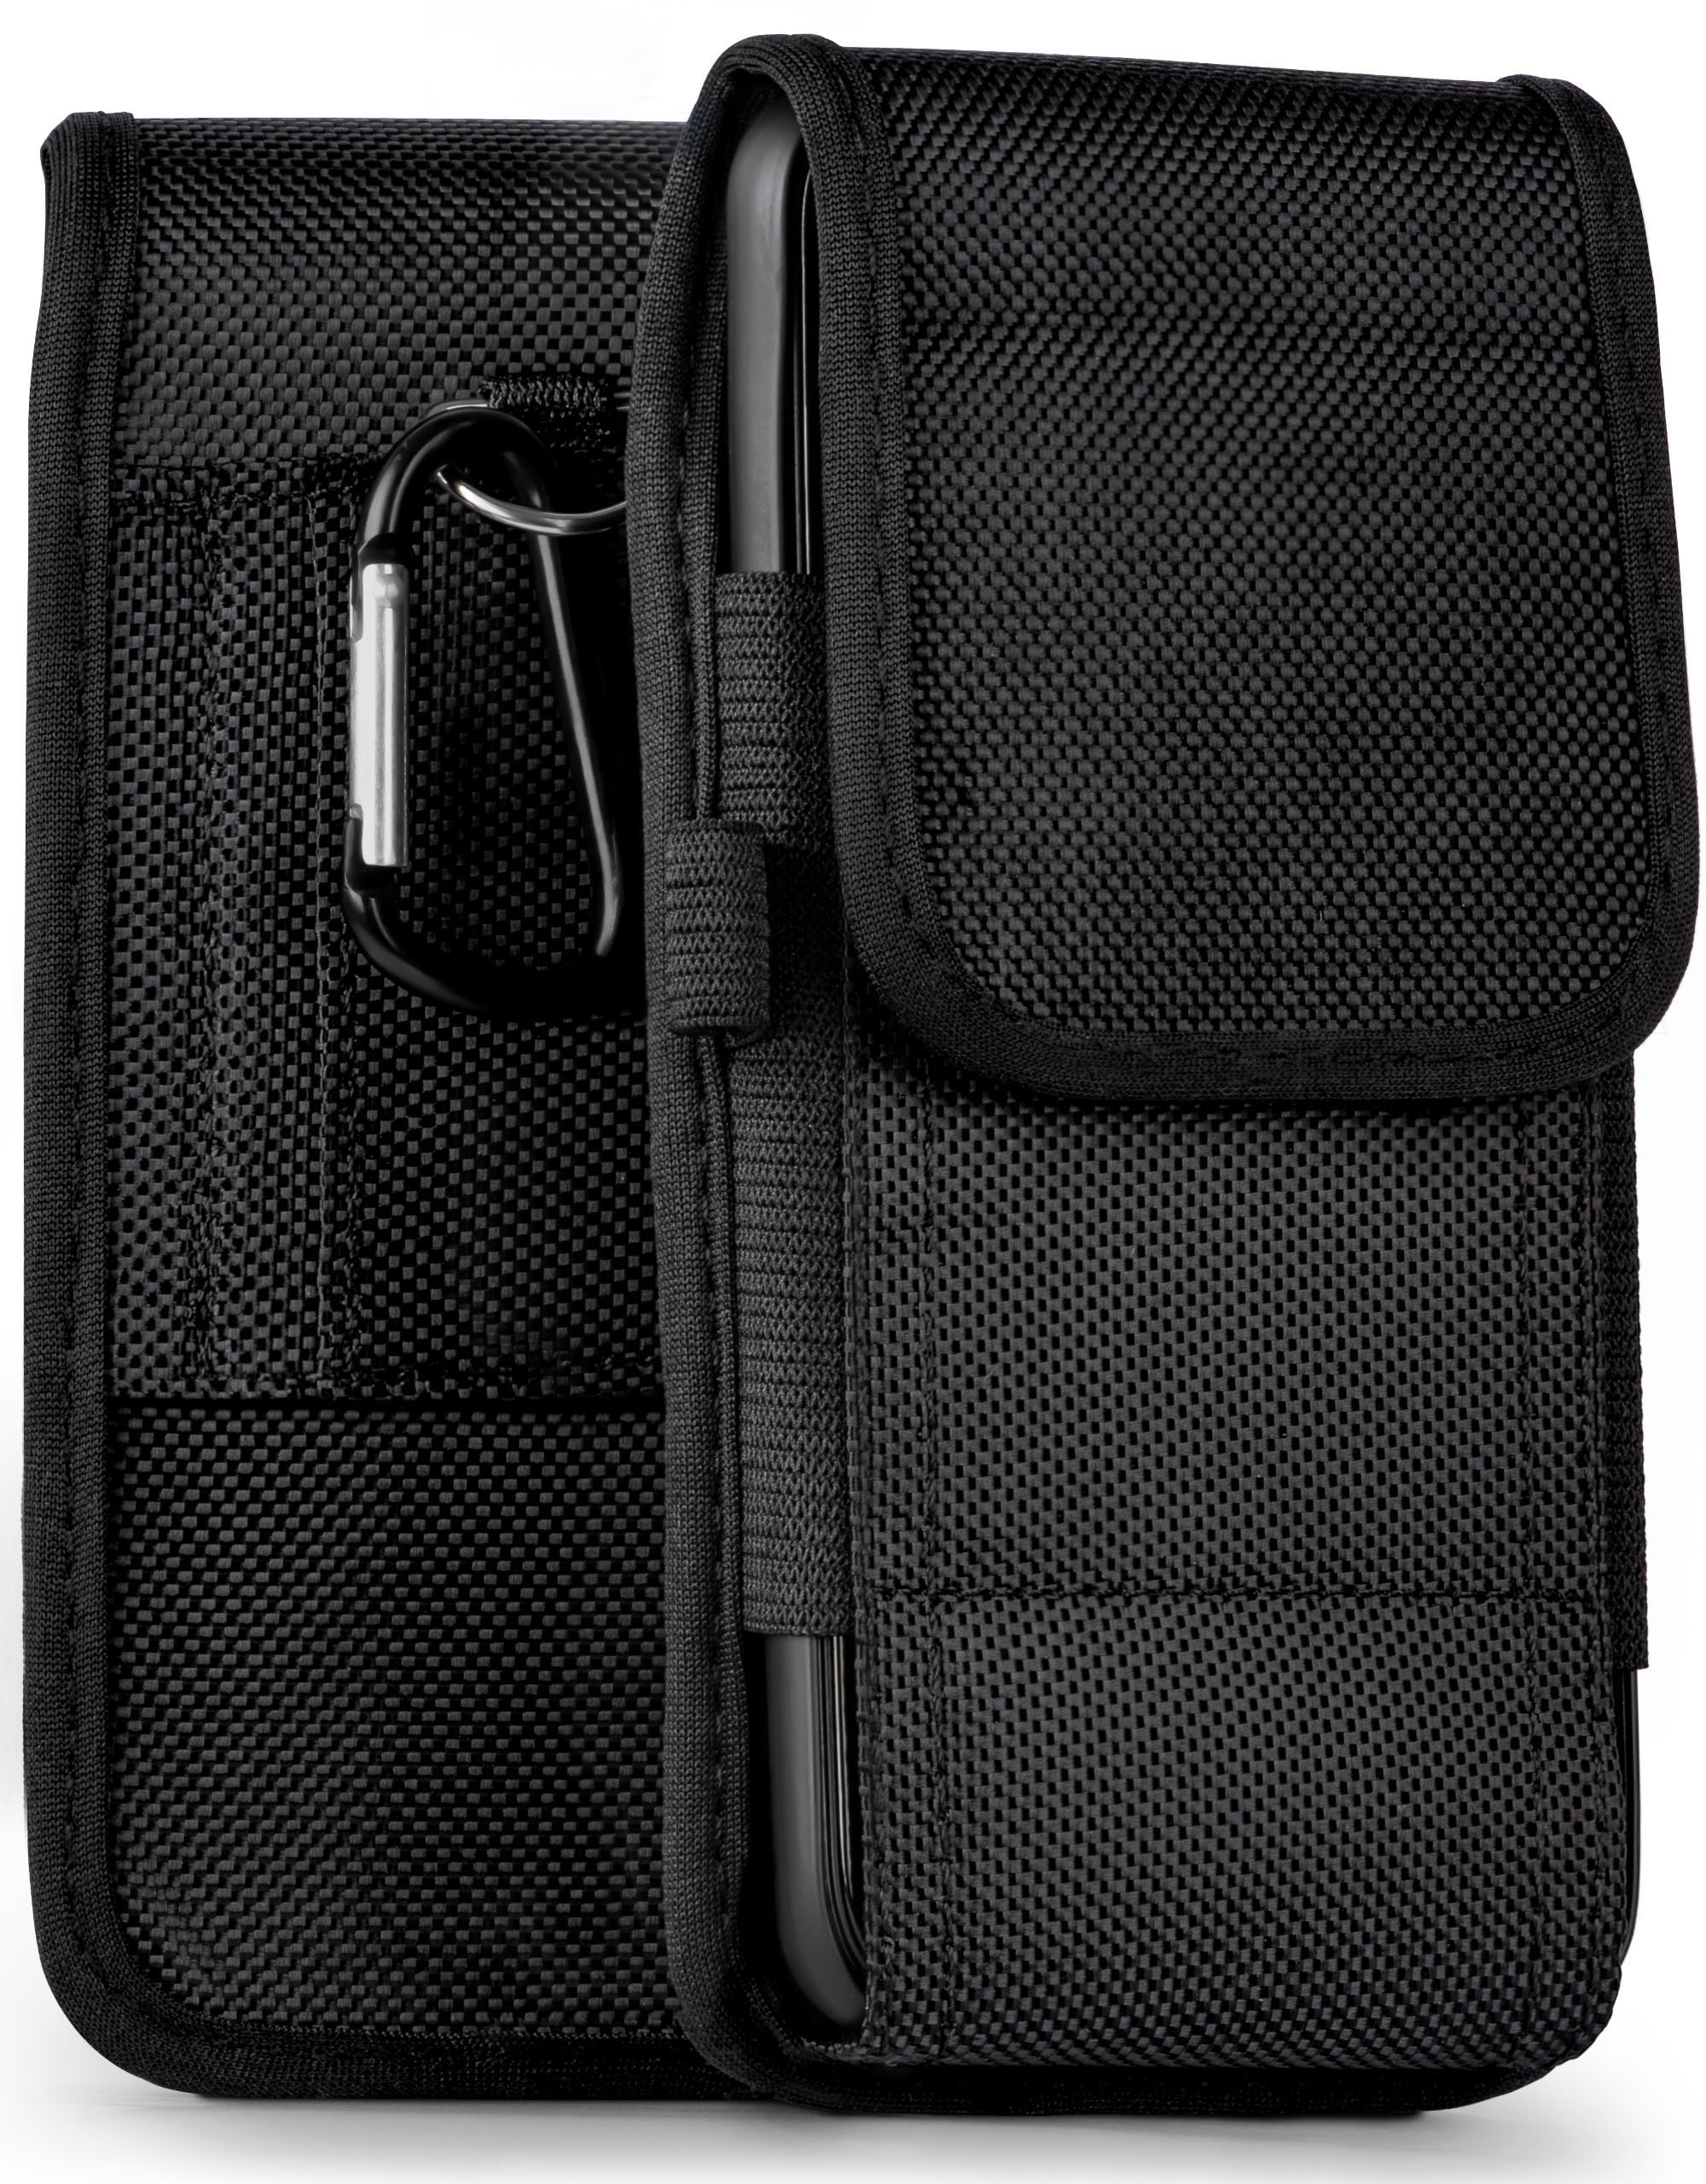 MOEX Trail Case, Pixel Google, 4a, Holster, Agility